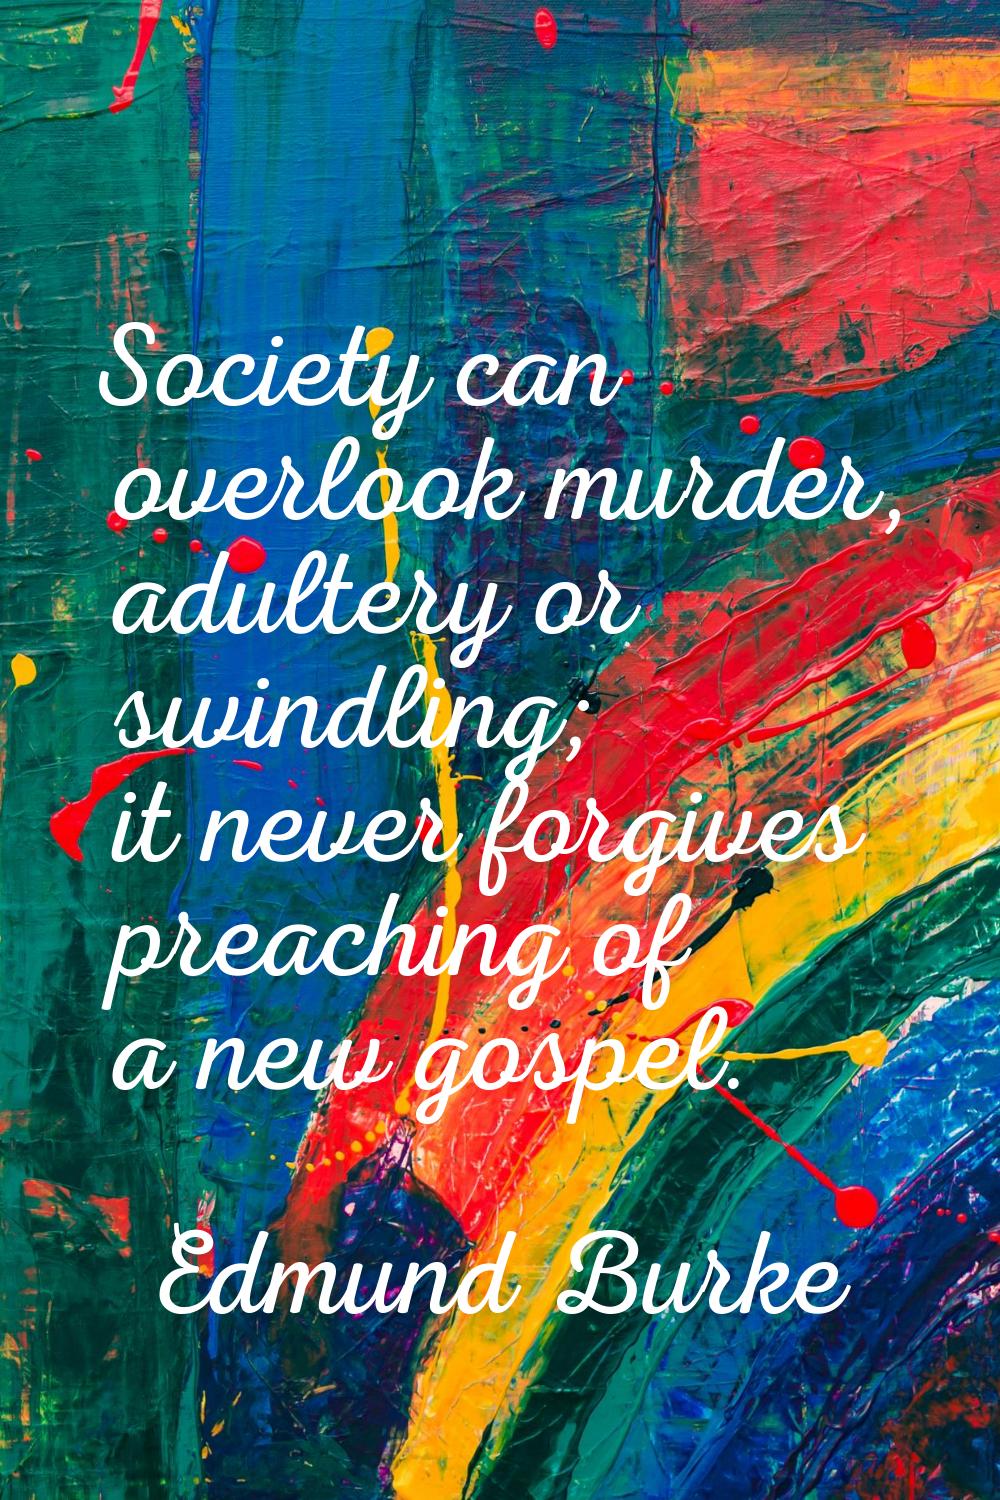 Society can overlook murder, adultery or swindling; it never forgives preaching of a new gospel.